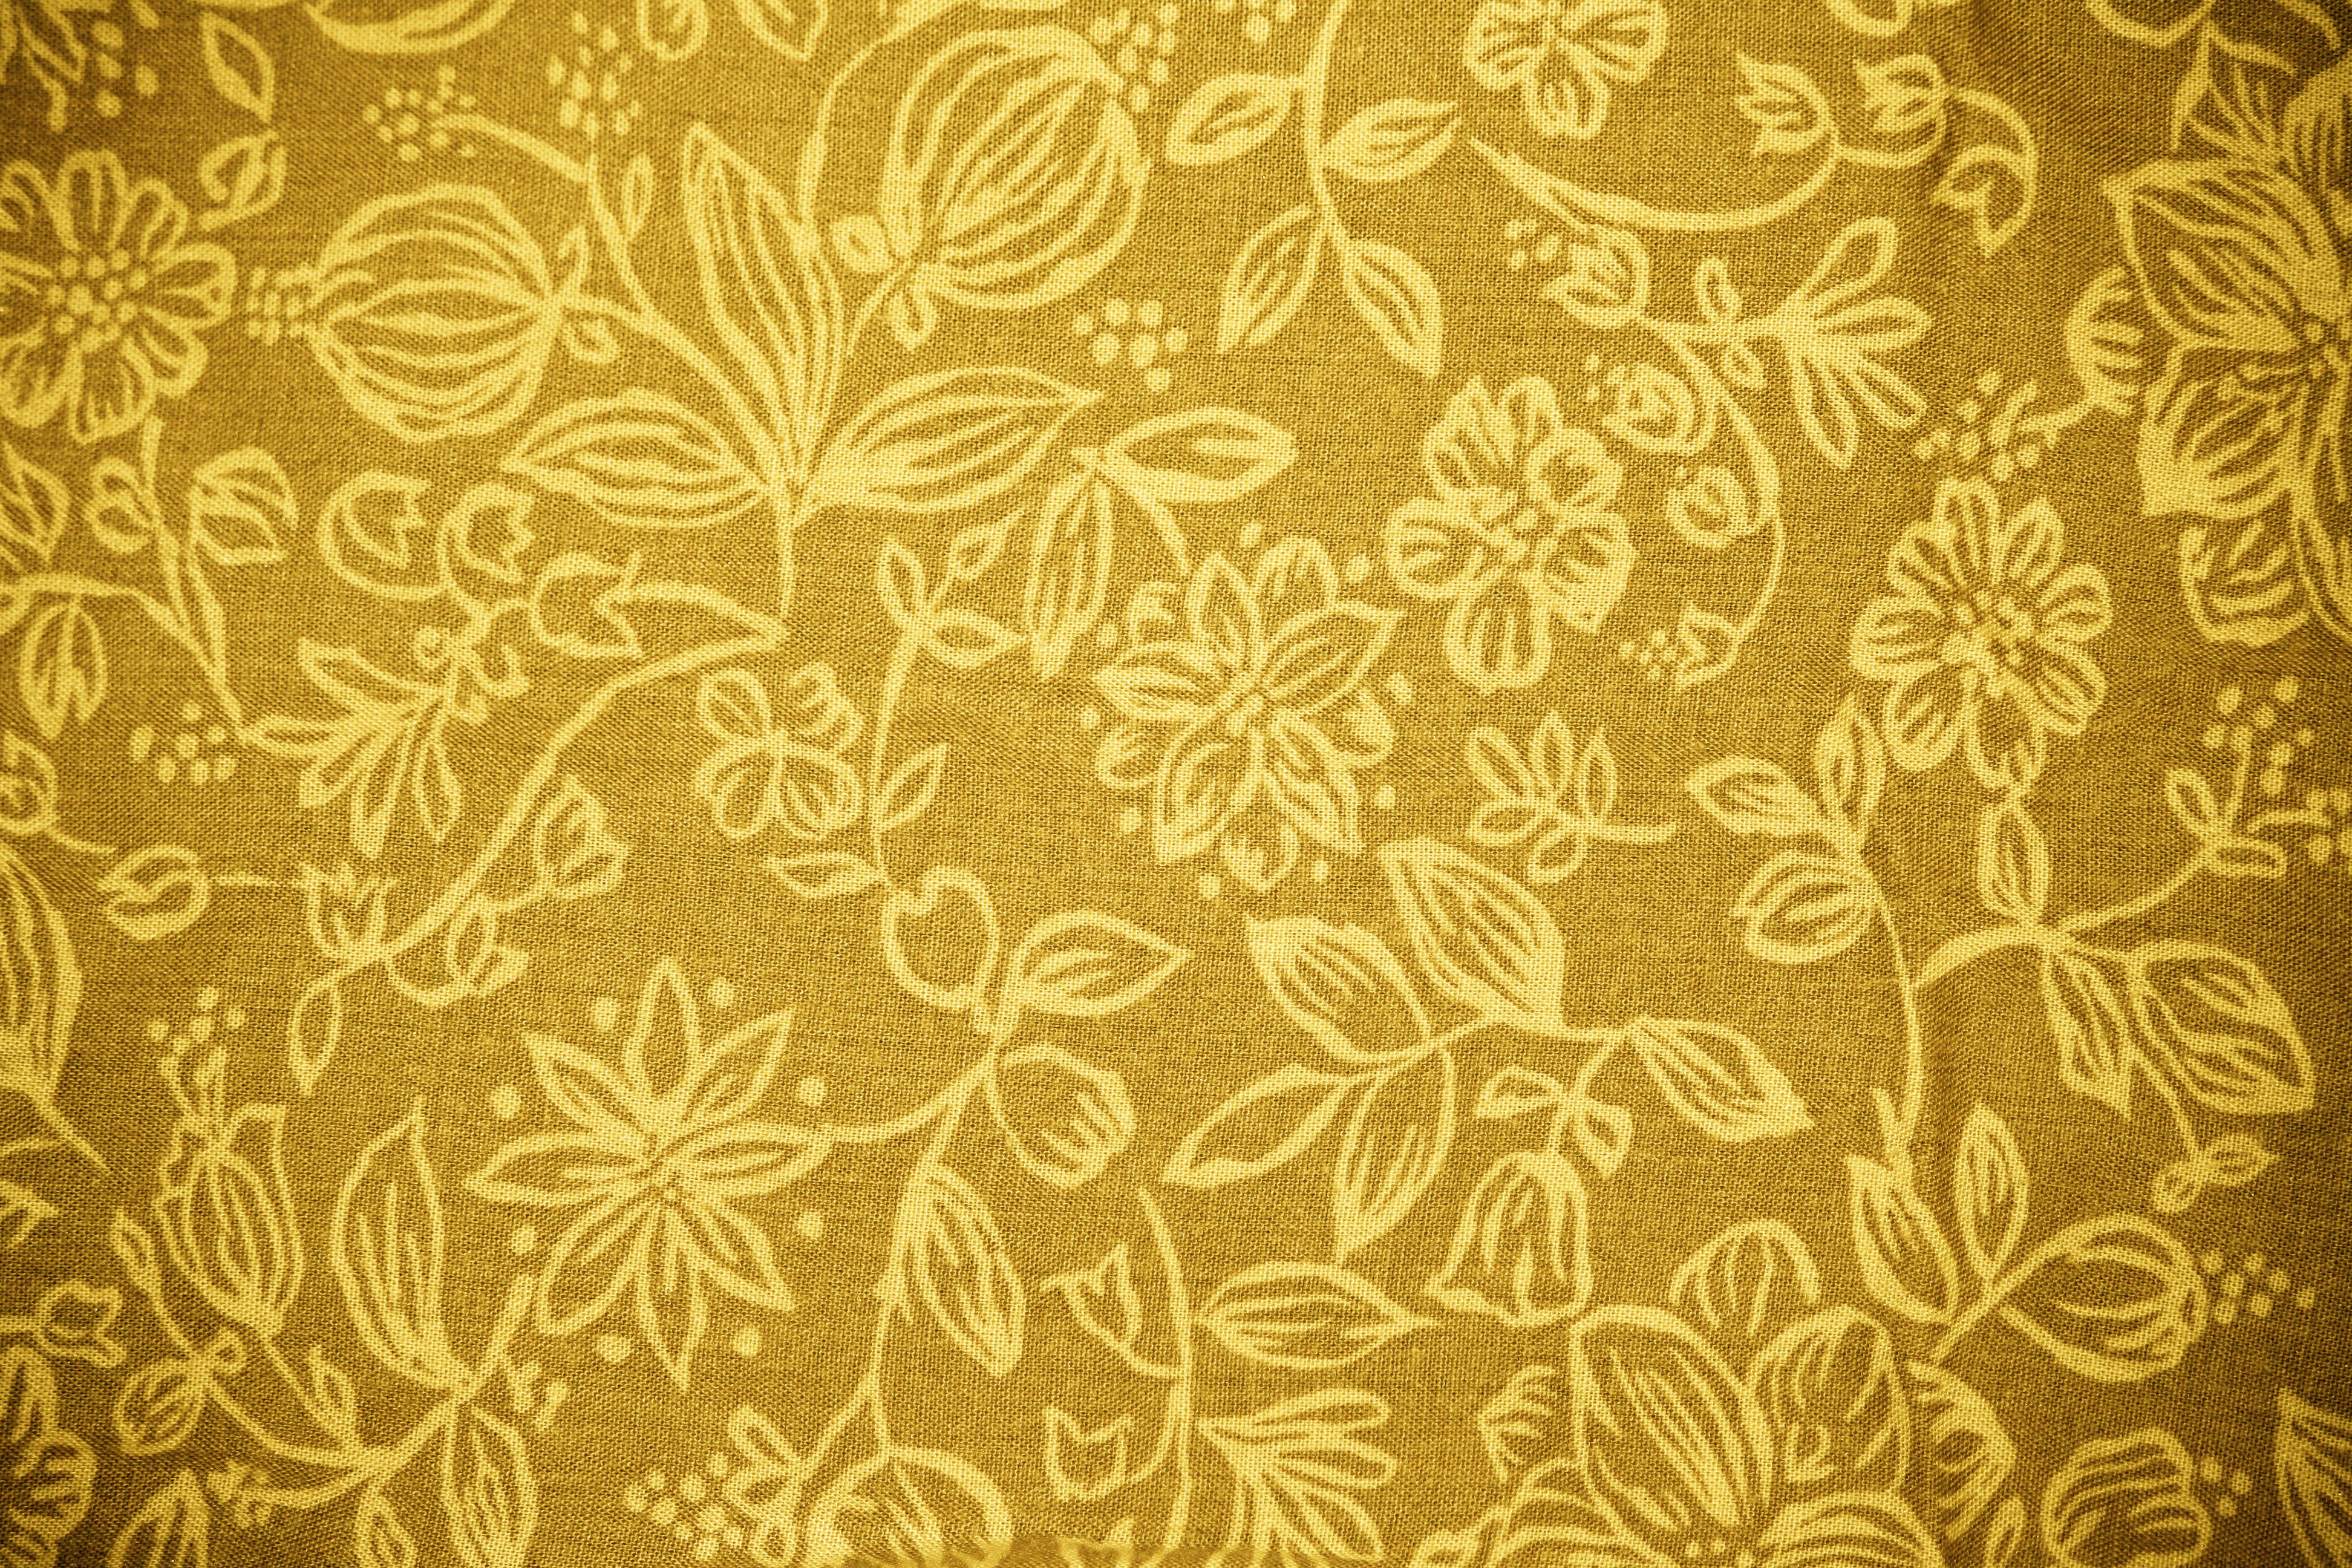 Gold Fabric with Floral Pattern Texture   Free High Resolution Photo